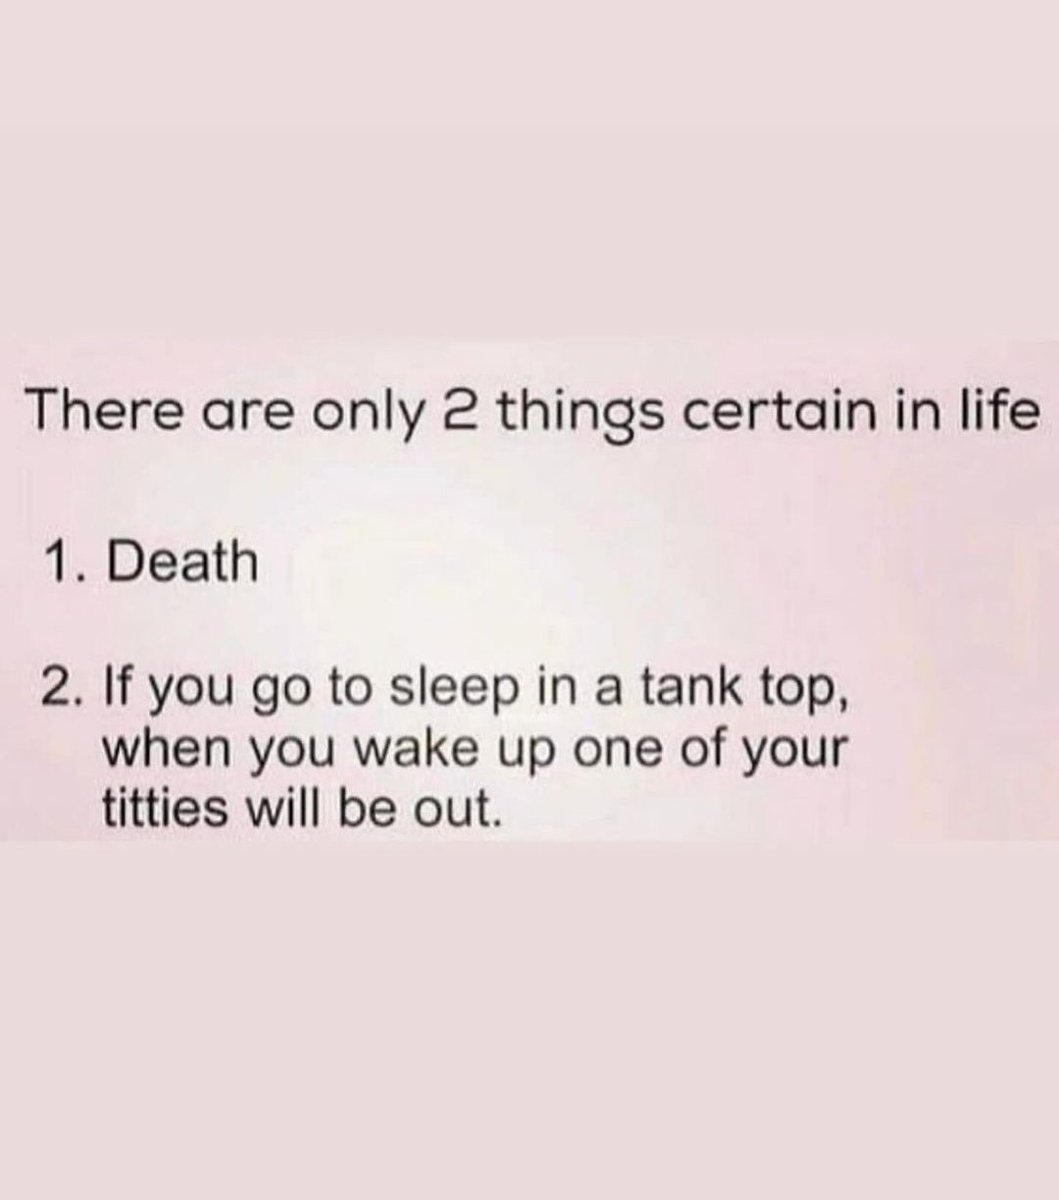 Don't know about death but the other, every fckng time